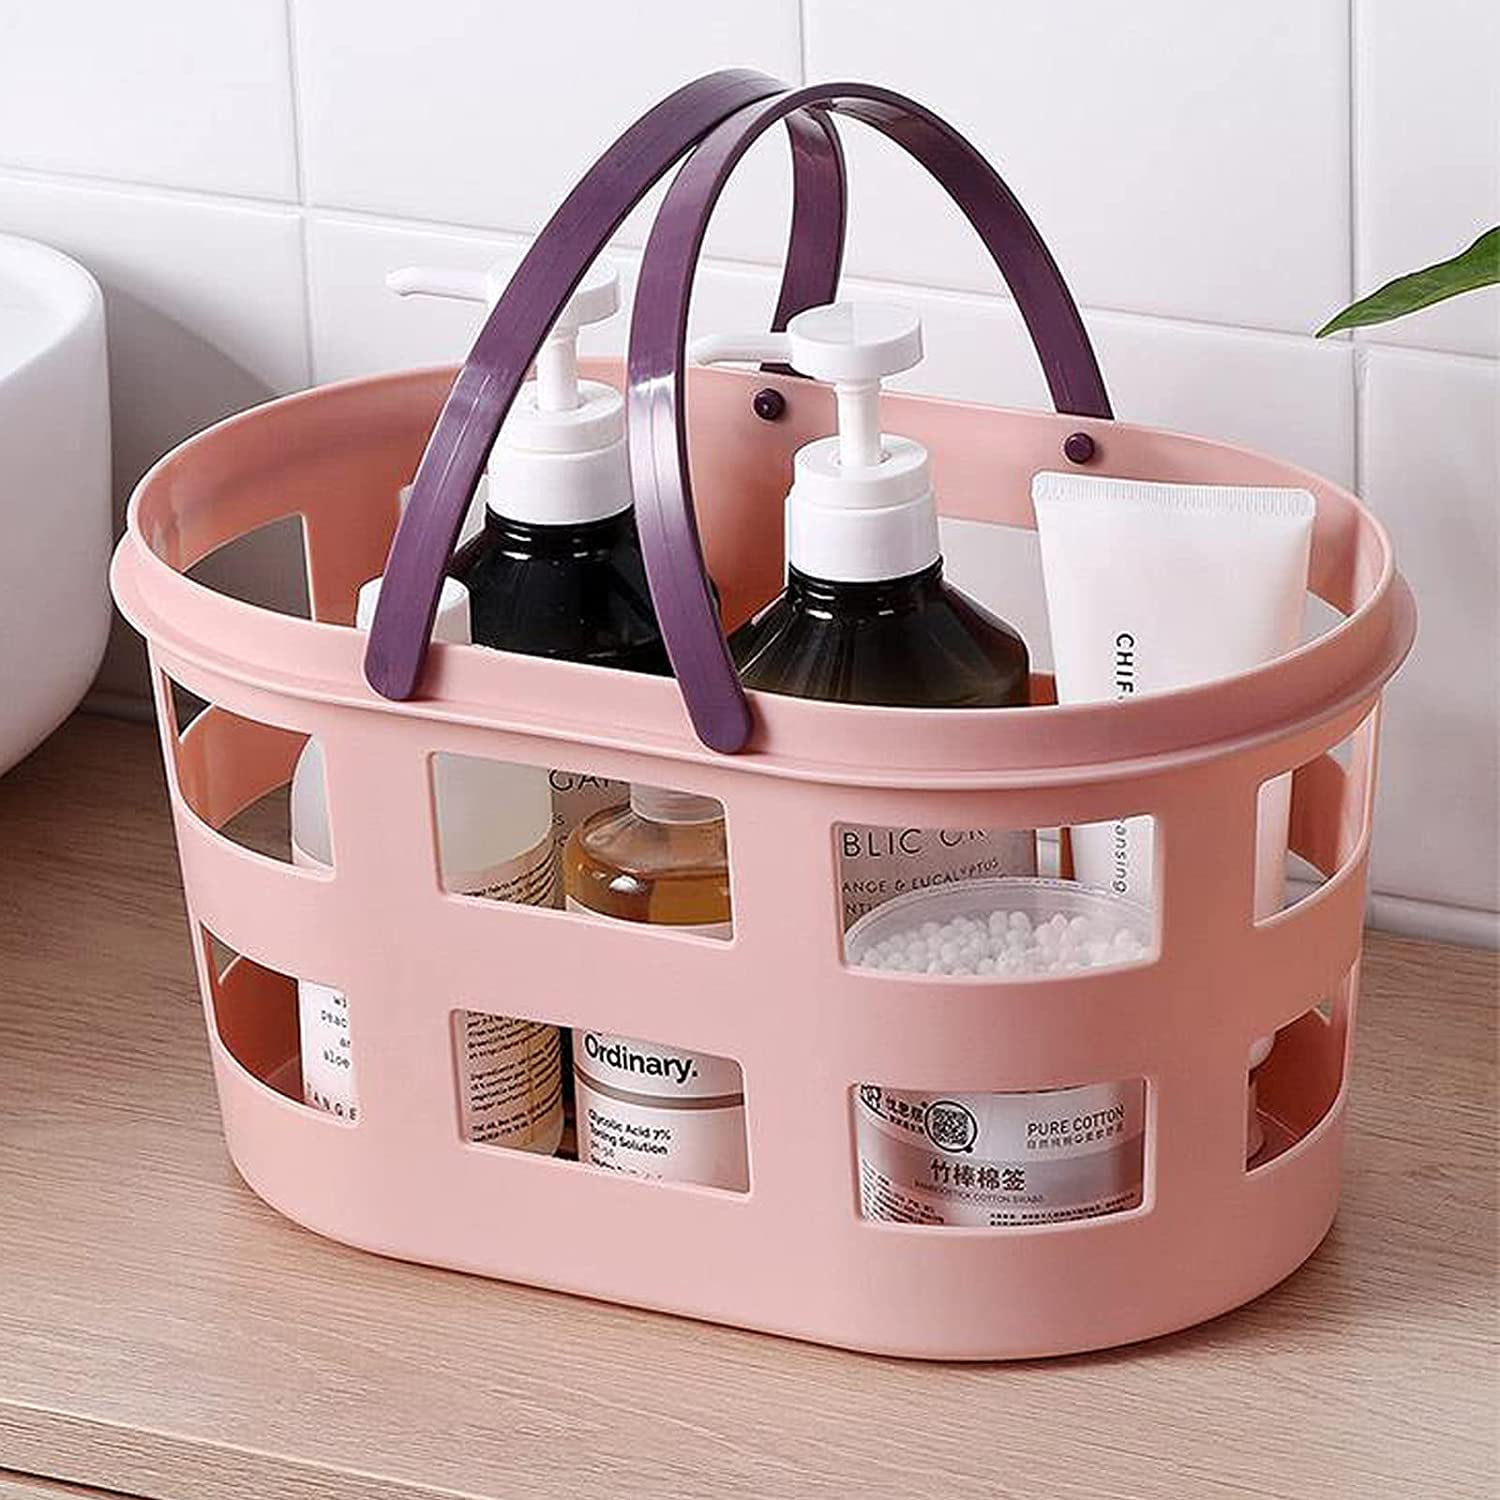 JiatuA Large Cleaning Supplies Organizer with Handle Portable Shower Caddy  Basket Plastic Bucket Tool Storage for Bathroom, Bedroom, Kitchen, College